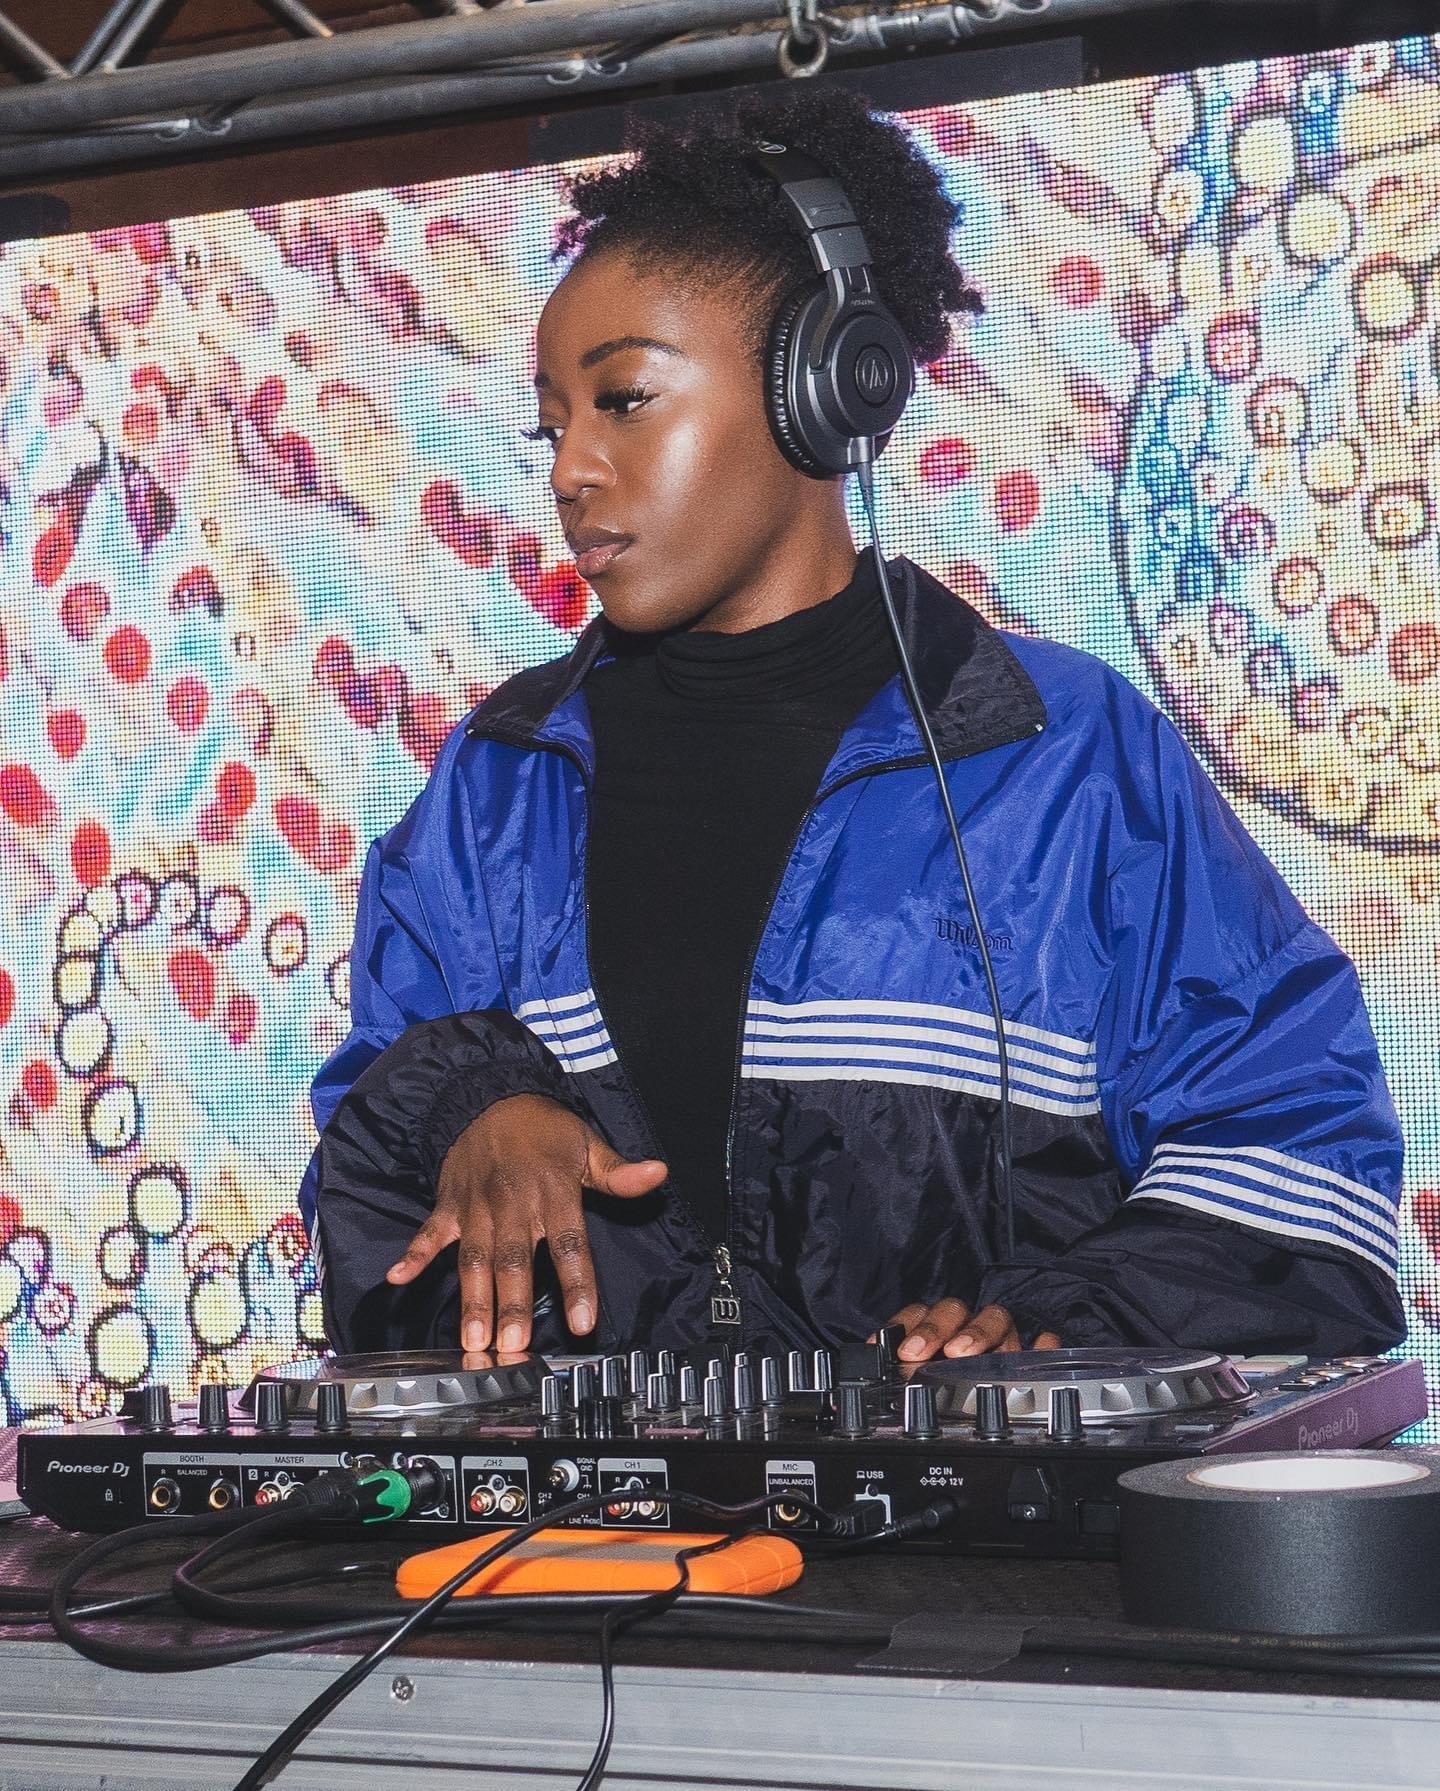 A person wearing a windbreaker and over-the-ear headphones stands at a DJ station with a colorful backdrop